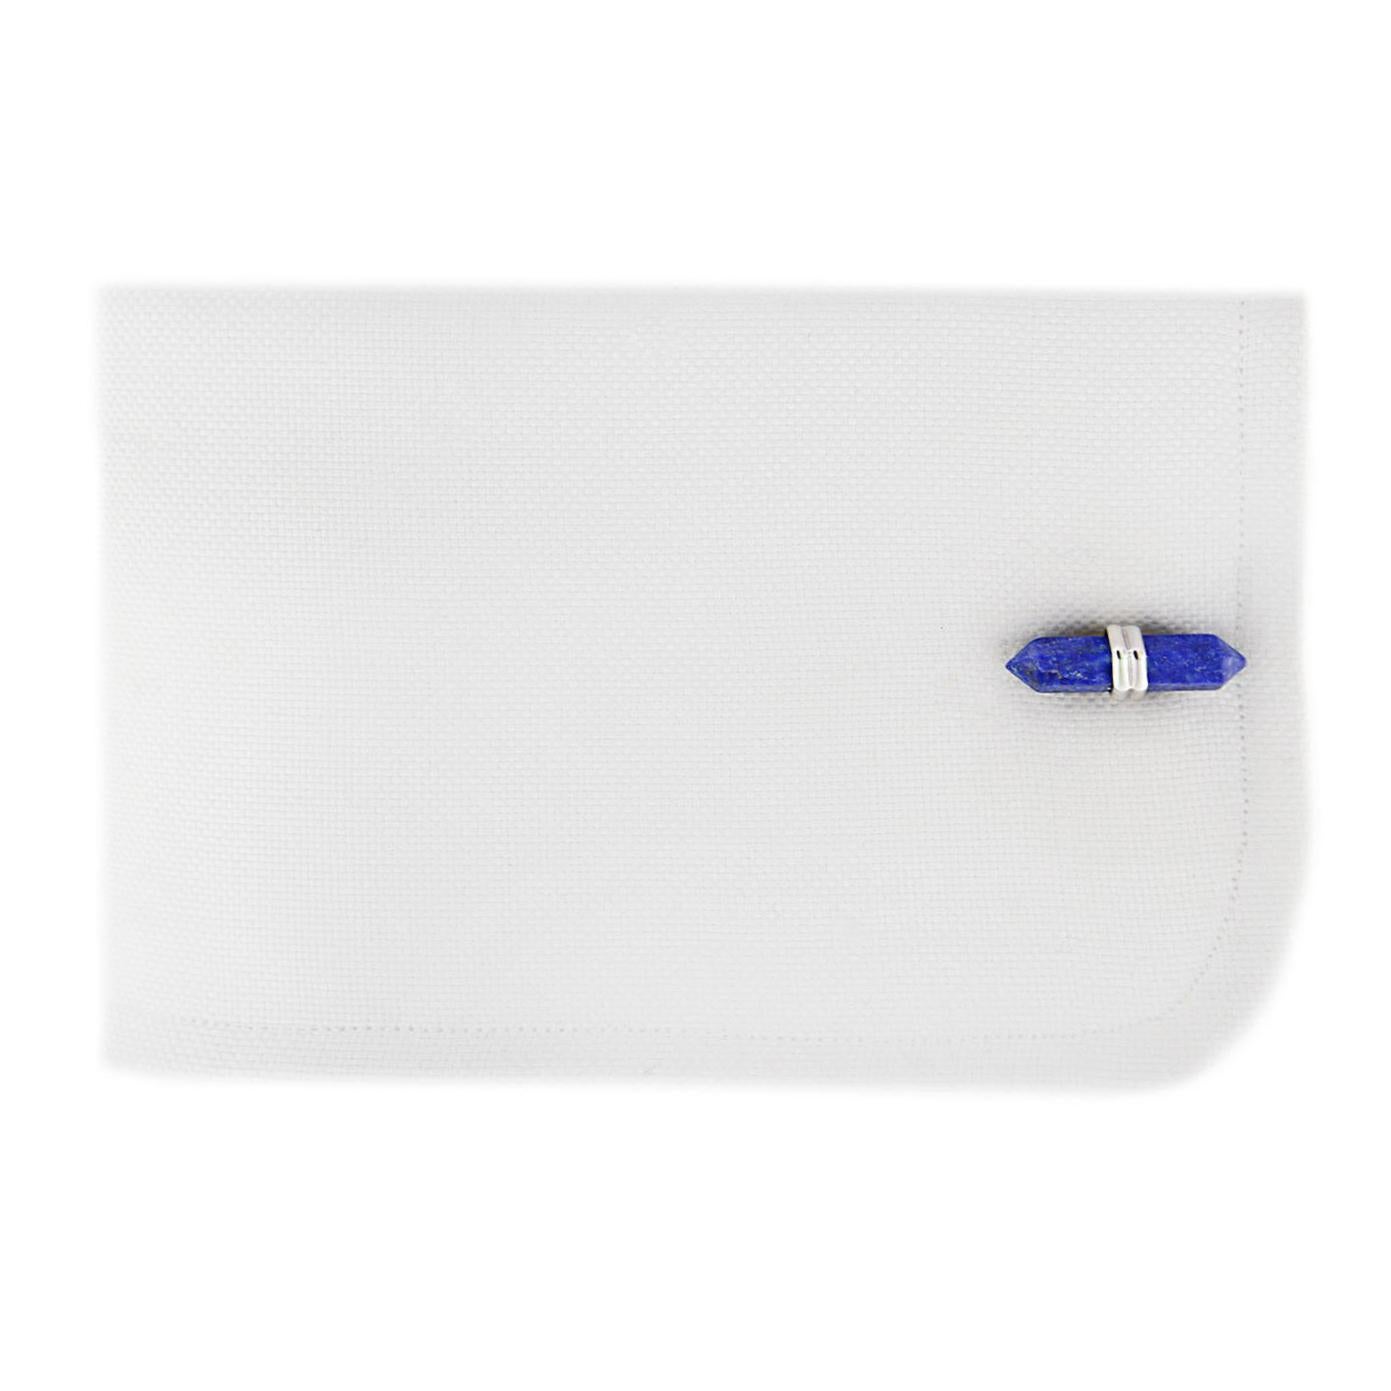 Jona design collection, hand crafted in Italy, Lapis Lazuli prism bar cufflinks mounted in rhodium plate sterling silver. Marked JONA, 925/°°° stamped.
Measurements: L 0.86 in / 22 mm X 0.18 in / 4.80 mm 
Also available in 18k gold.
All Jona jewelry